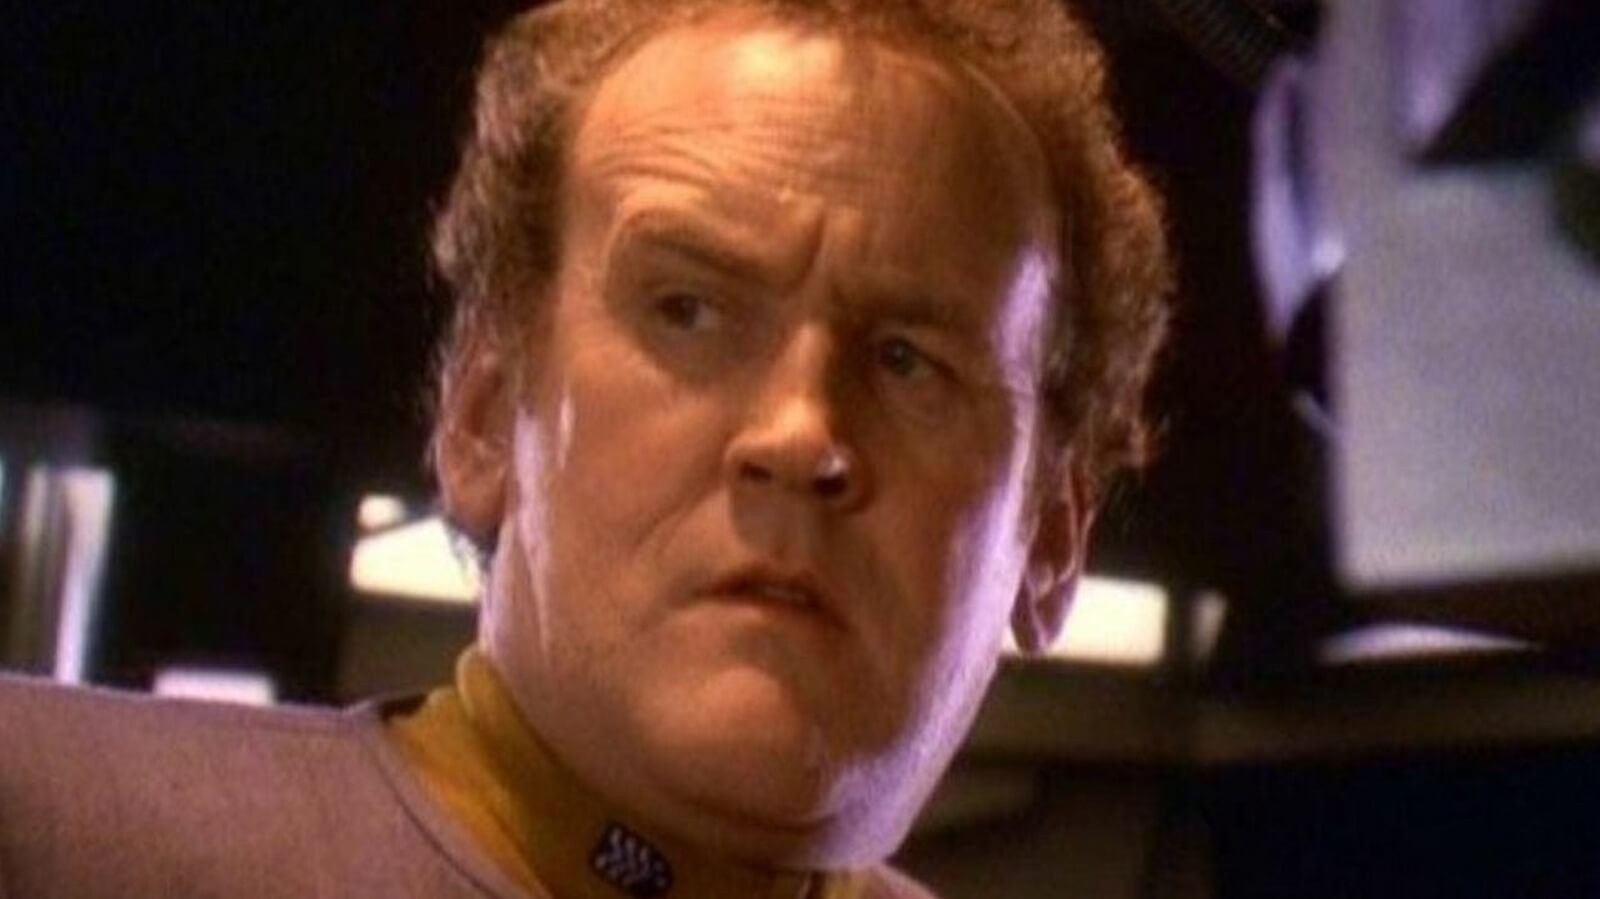 Colm Meaney was done with the stereotyping of Irish accent in the industry